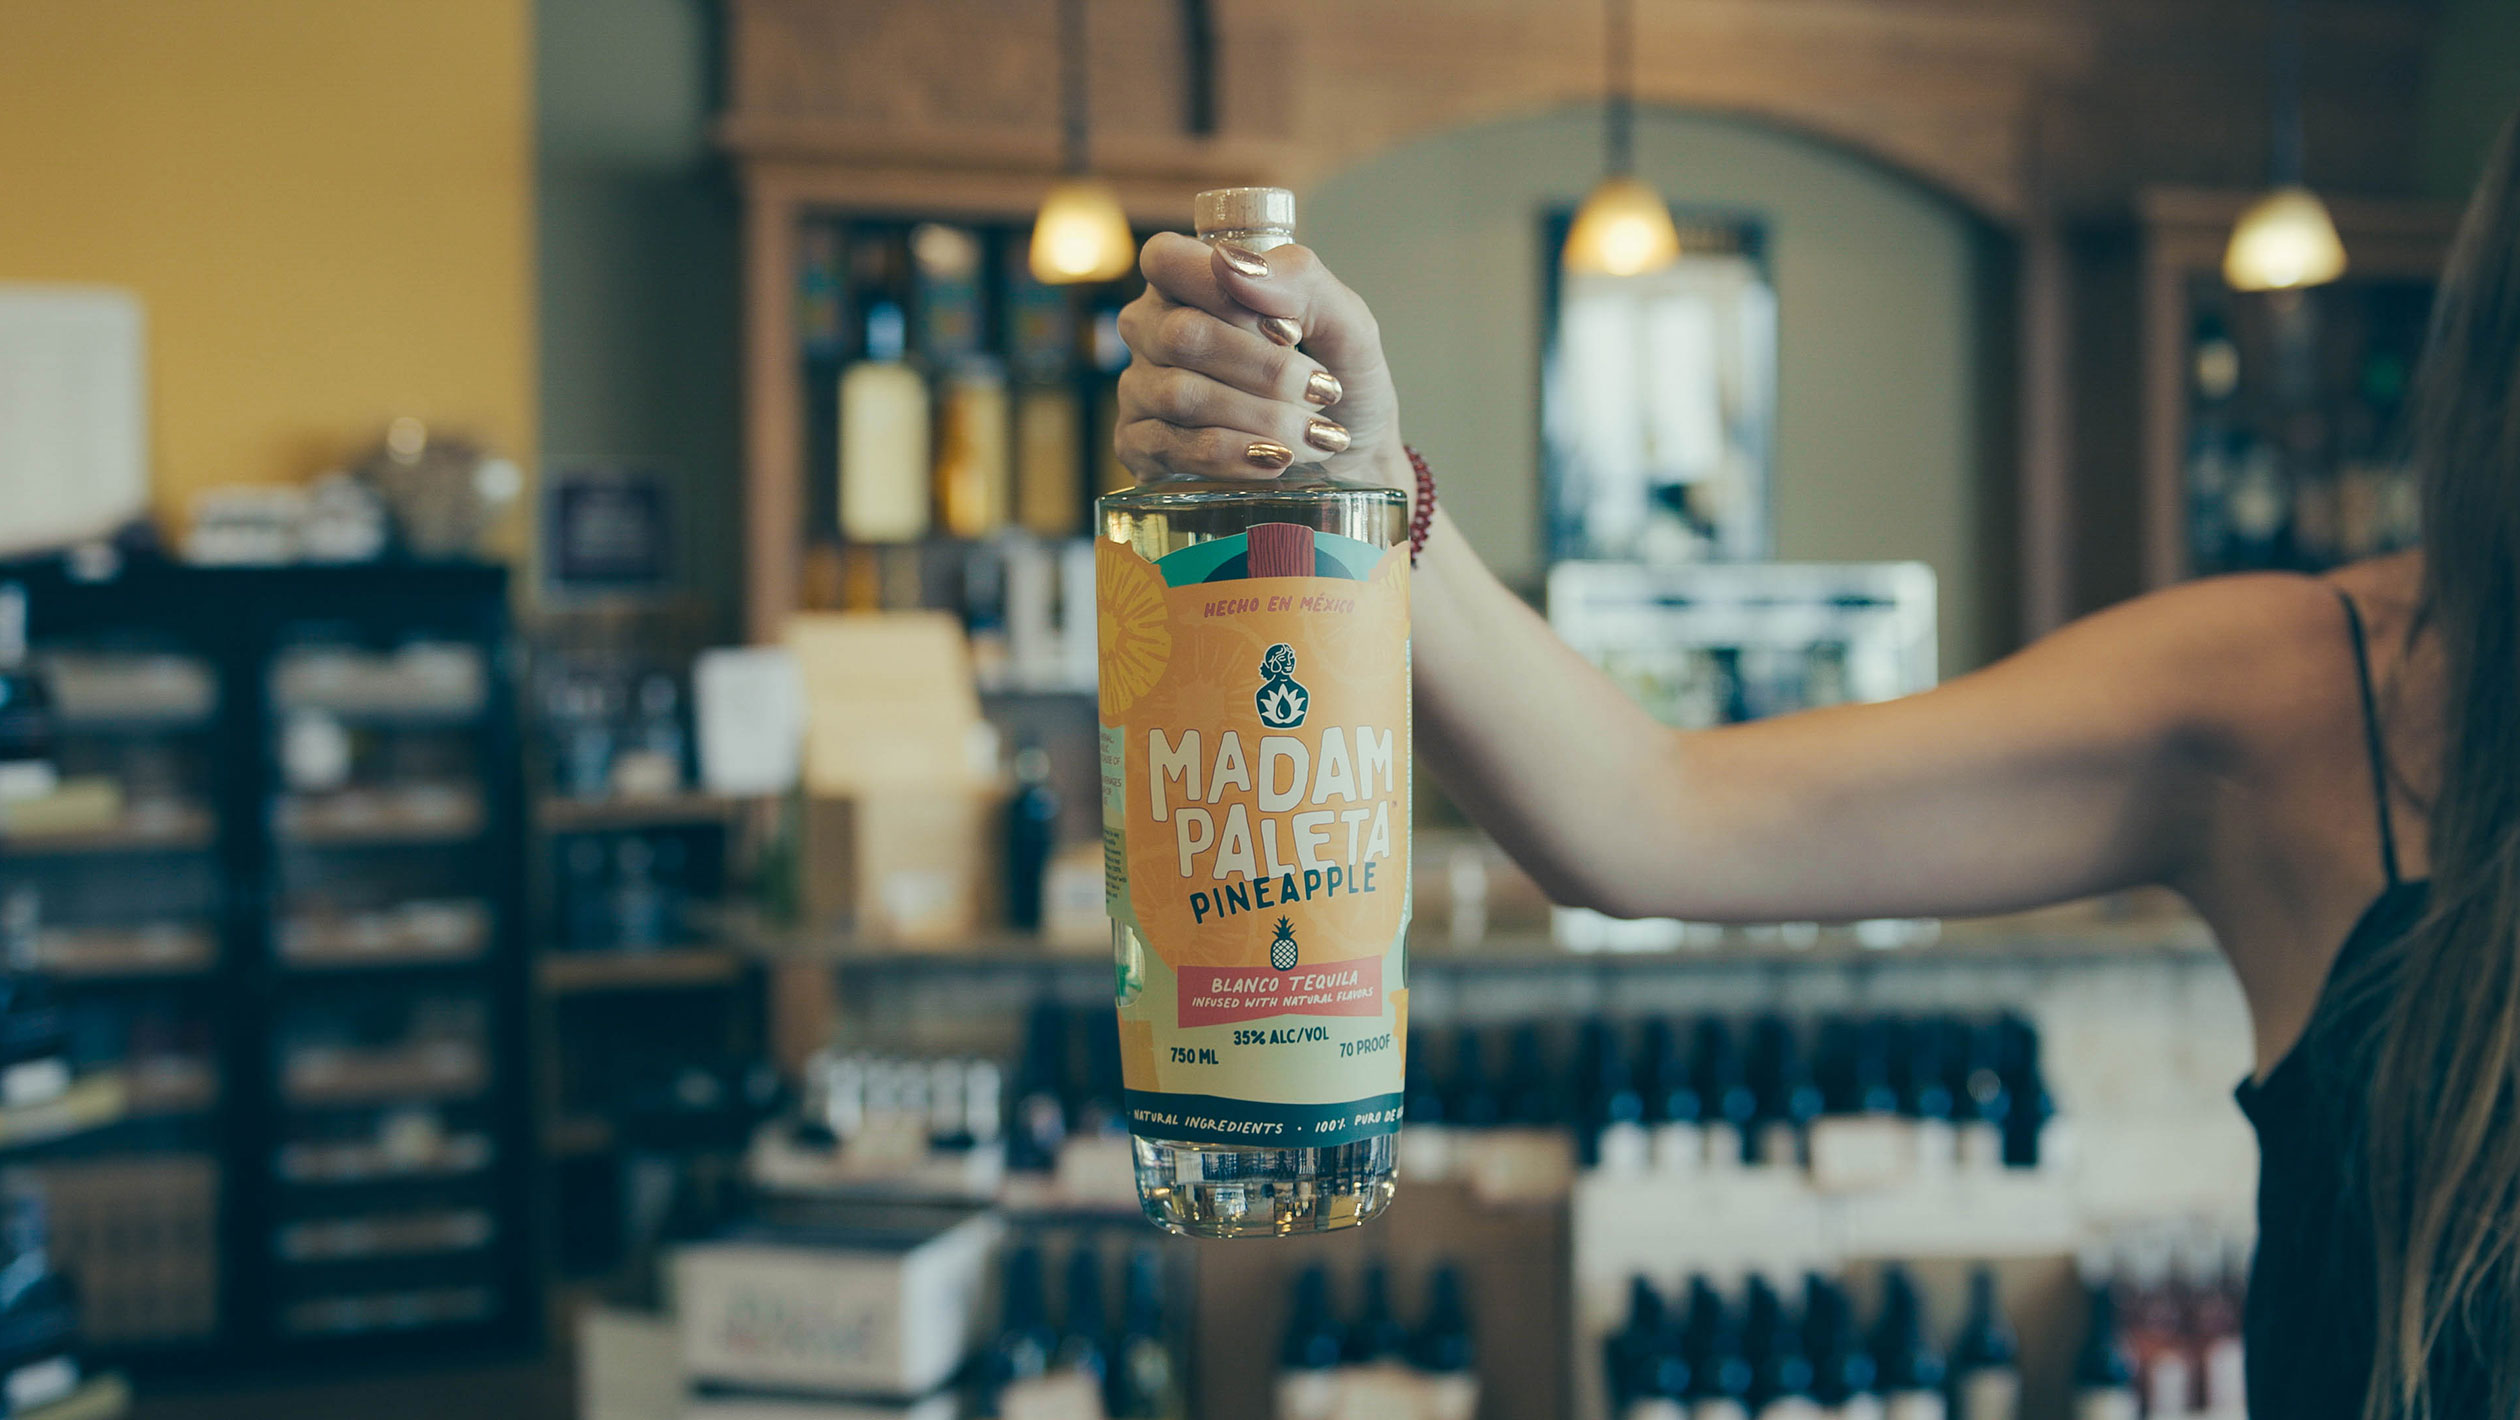 A hand holds up a bottle of Madam Paleta's pineapple-infused tequila